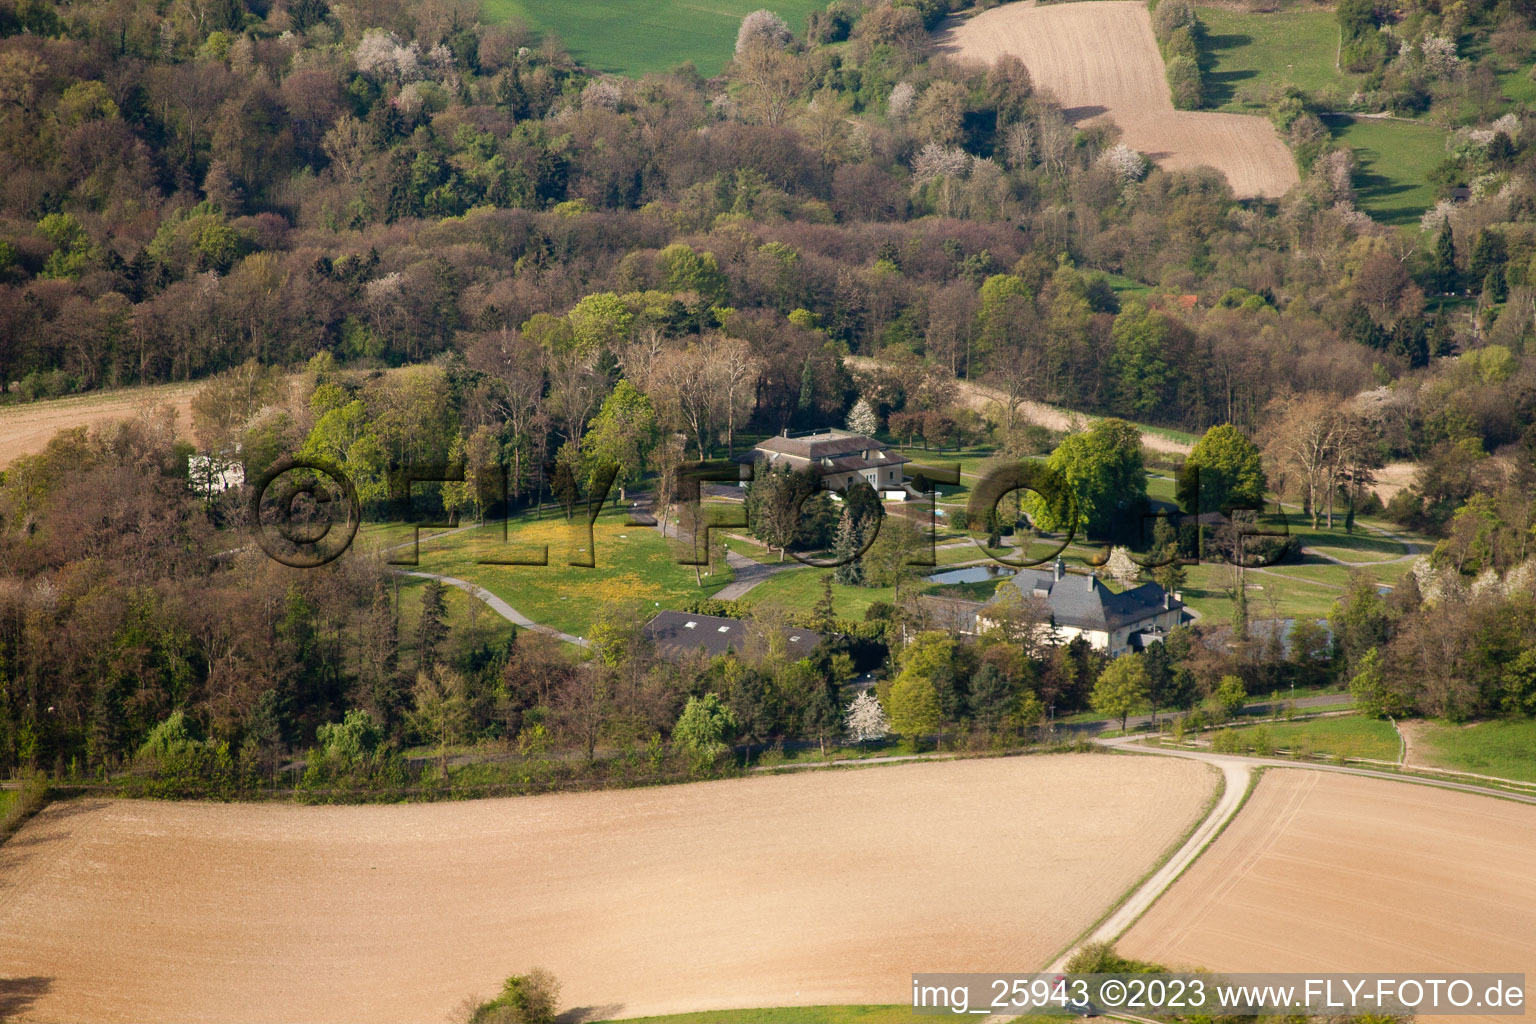 Former blacksmith's villa in the district Durlach in Karlsruhe in the state Baden-Wuerttemberg, Germany seen from above